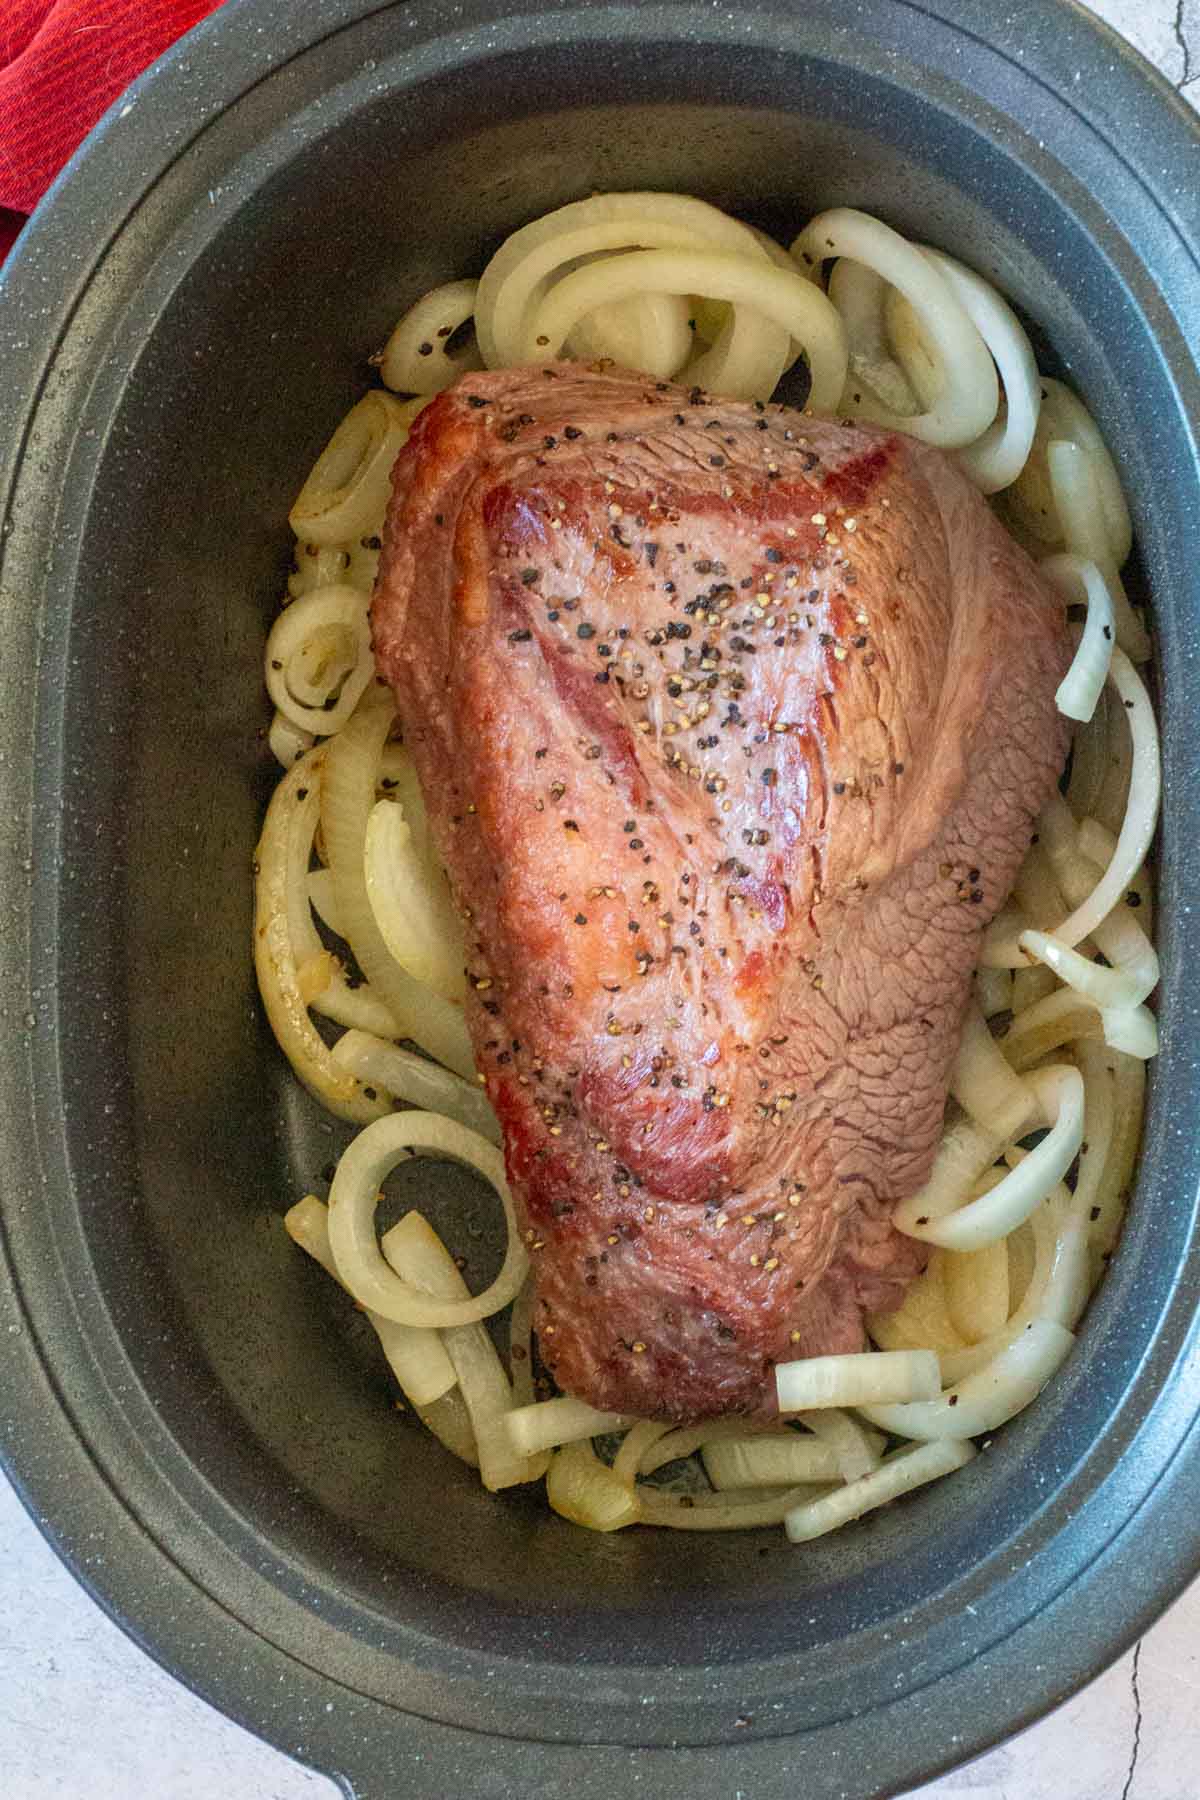 A beef brisket in a crock pot sitting on a bed of fried onions.